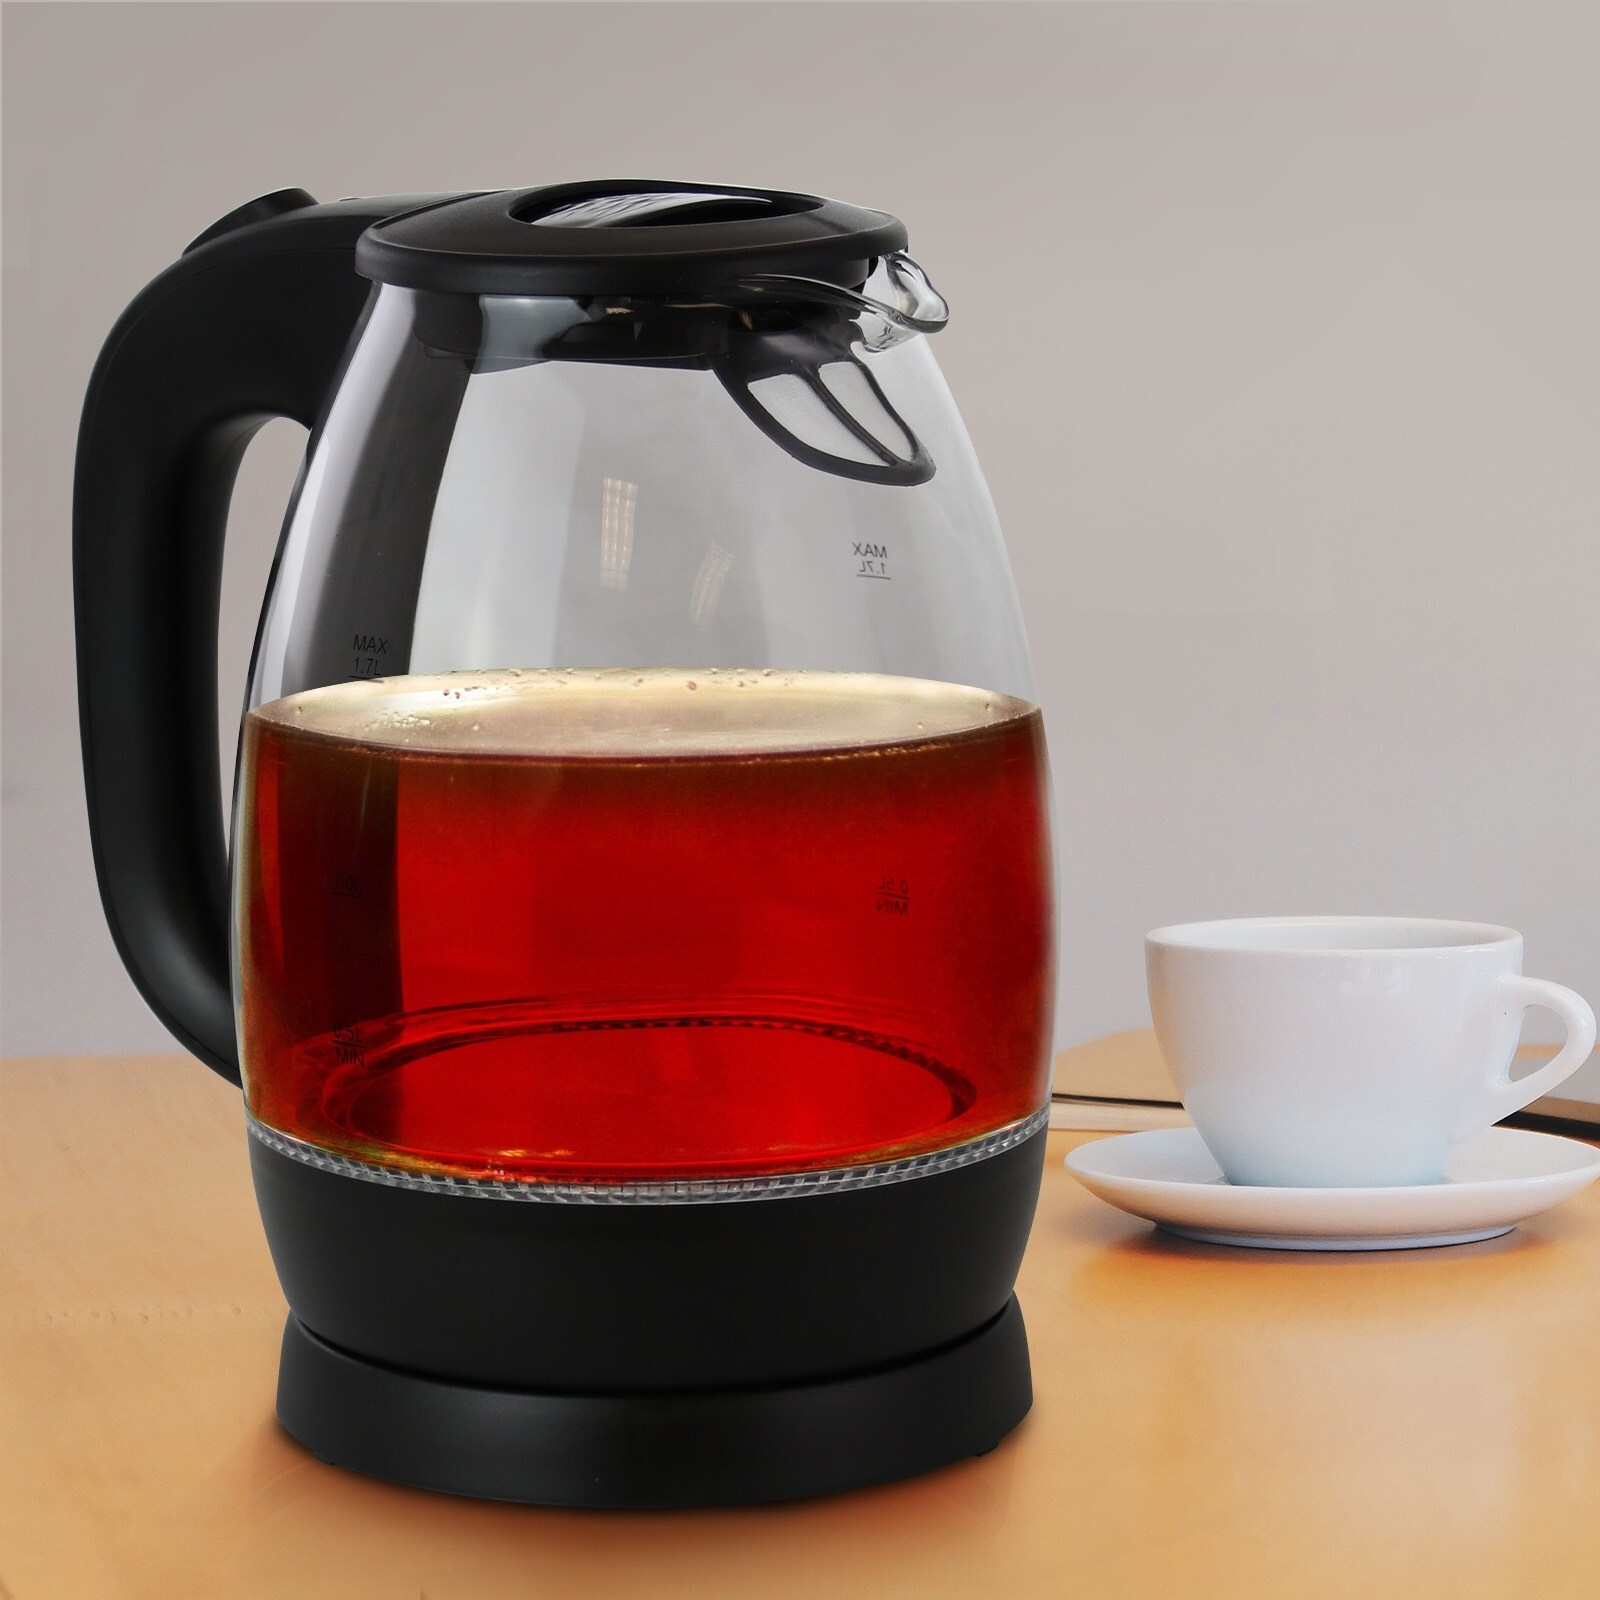 https://ak1.ostkcdn.com/images/products/is/images/direct/efd0d70cae1046b205ace94f08e098d326c193d7/Better-Chef-1.7L-Cordless-Electric-Glass-Tea-Kettle.jpg